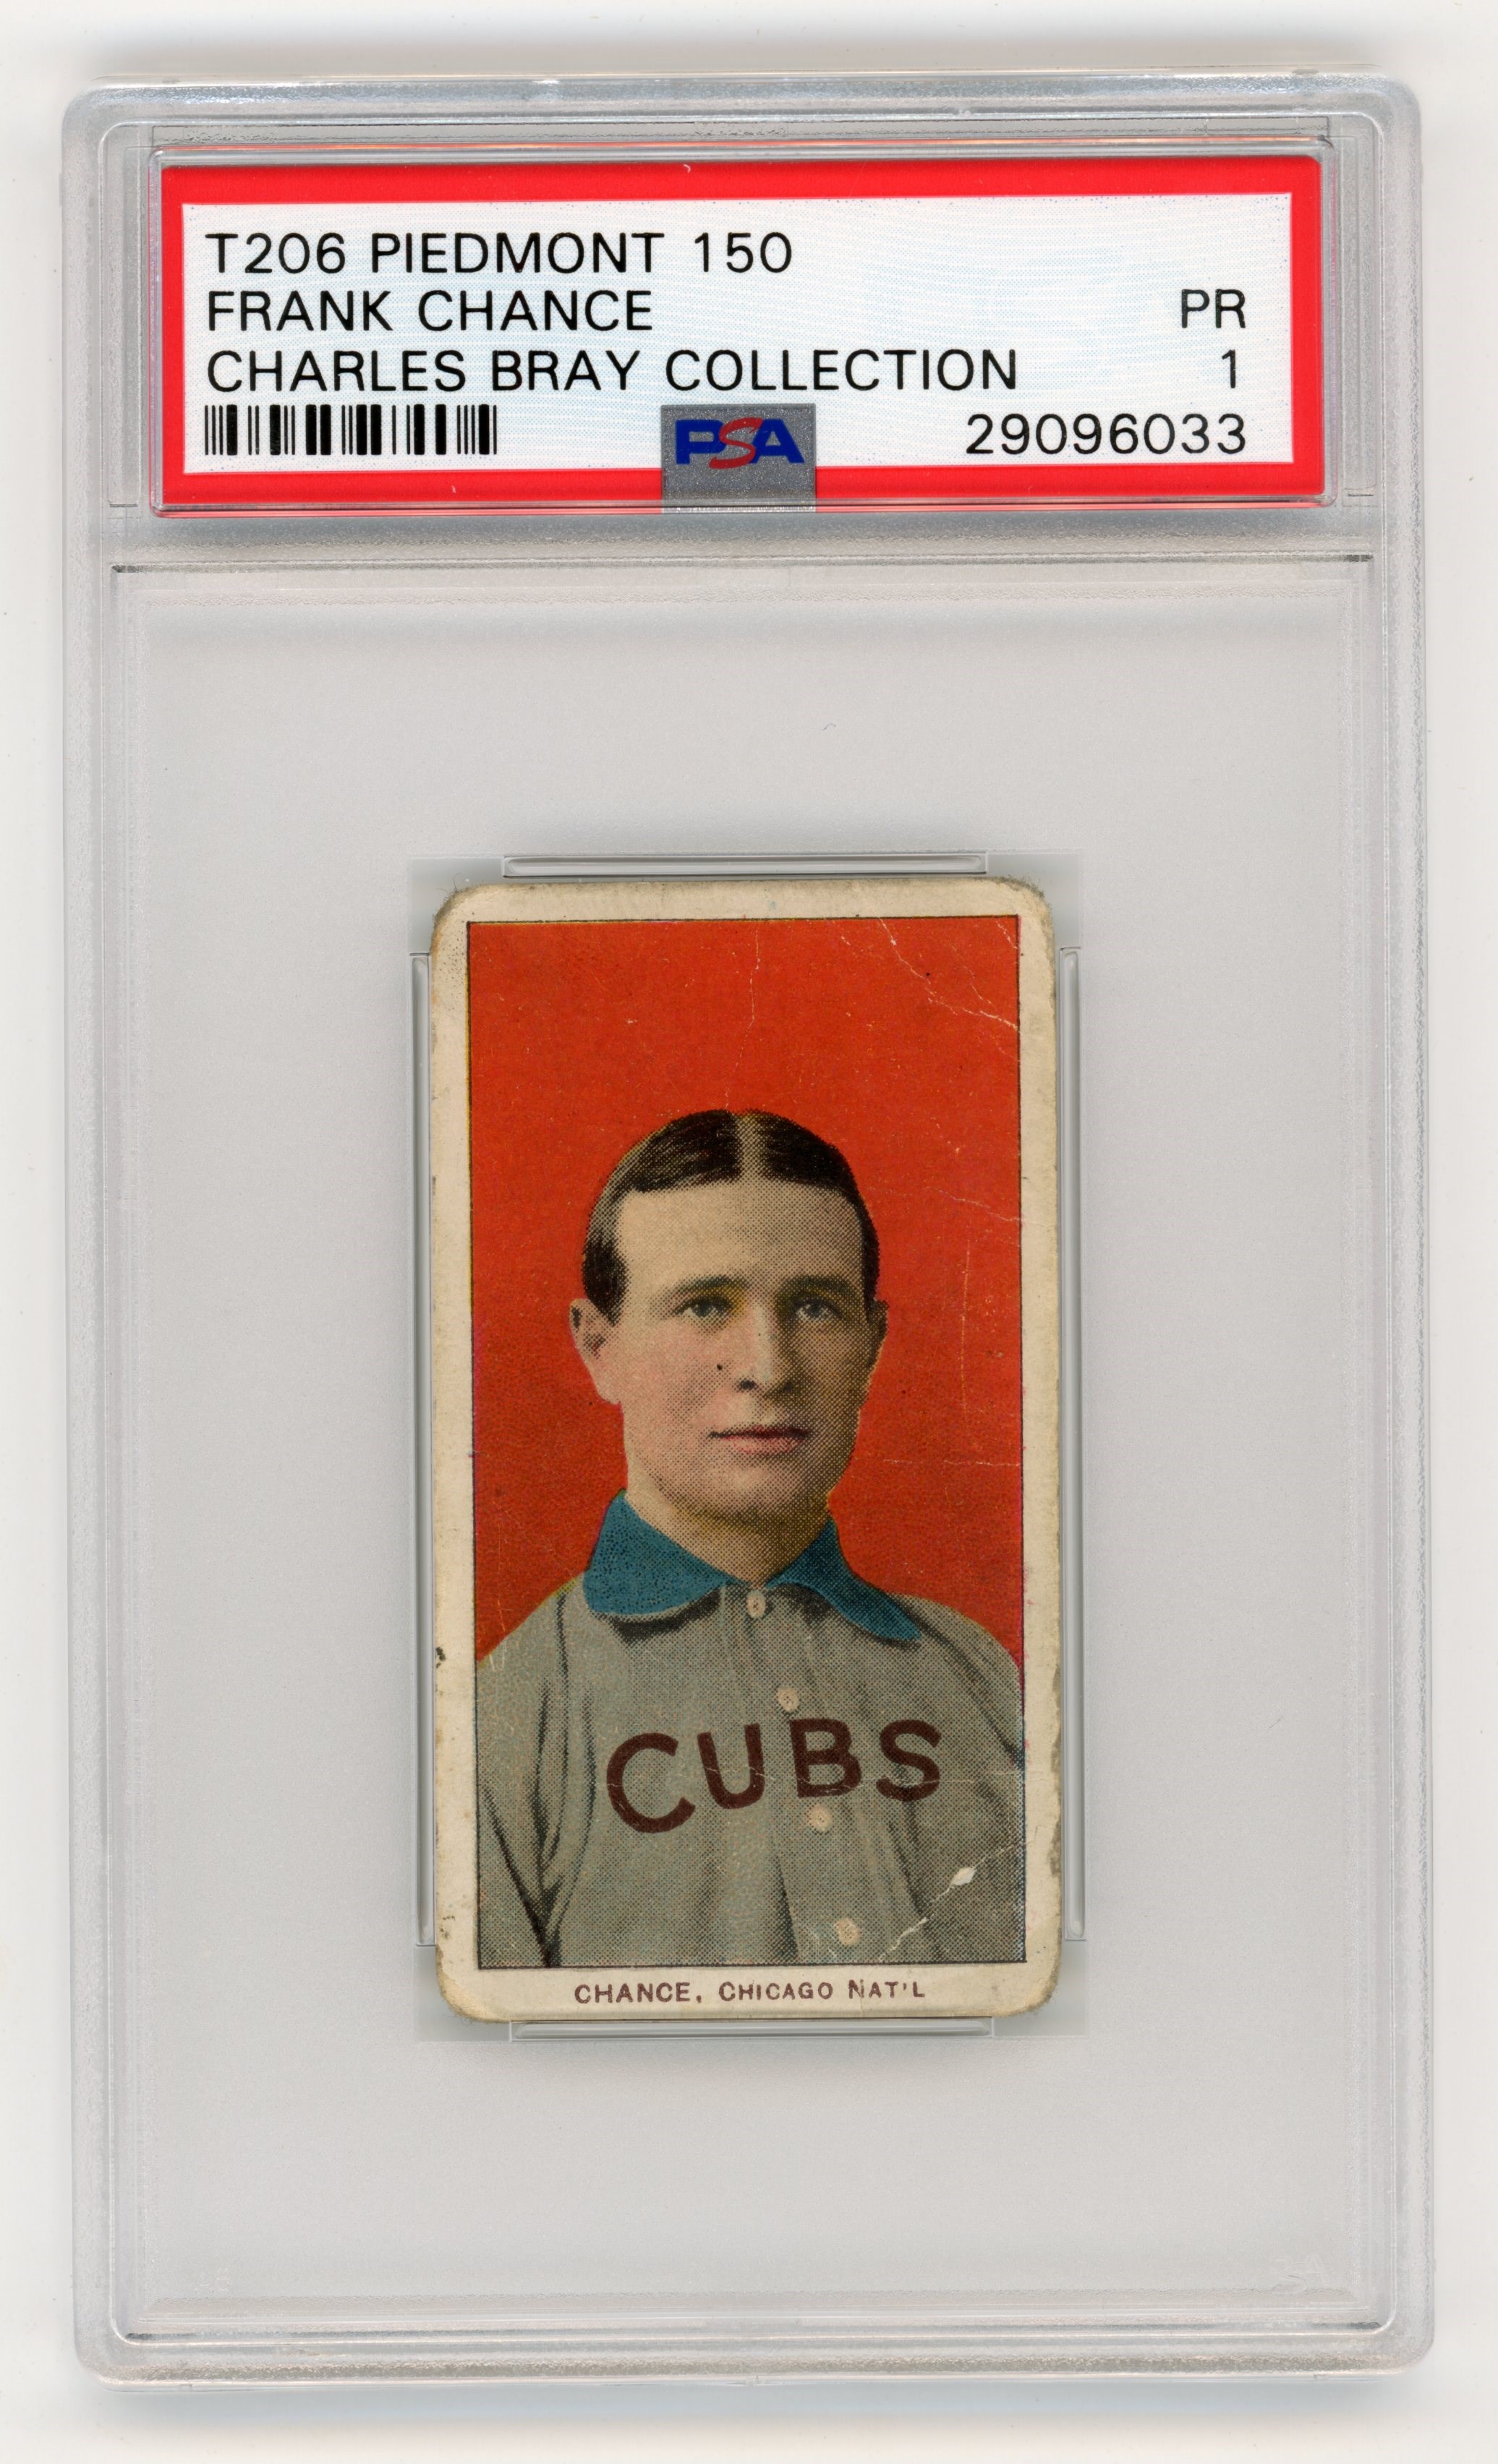 T206 Piedmont 150 Frank Chance PSA 1 From Charles Bray Collection